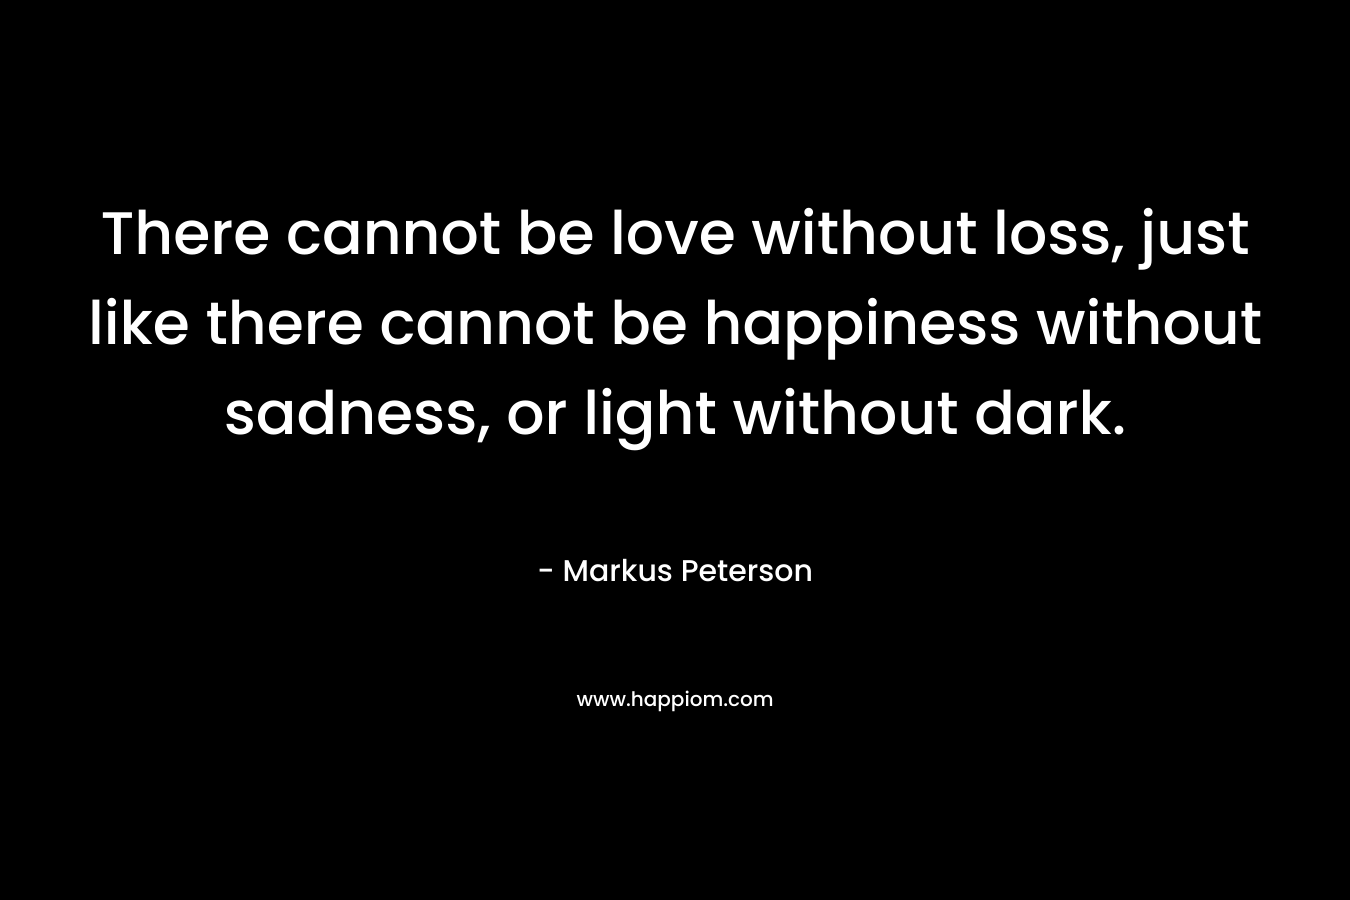 There cannot be love without loss, just like there cannot be happiness without sadness, or light without dark.